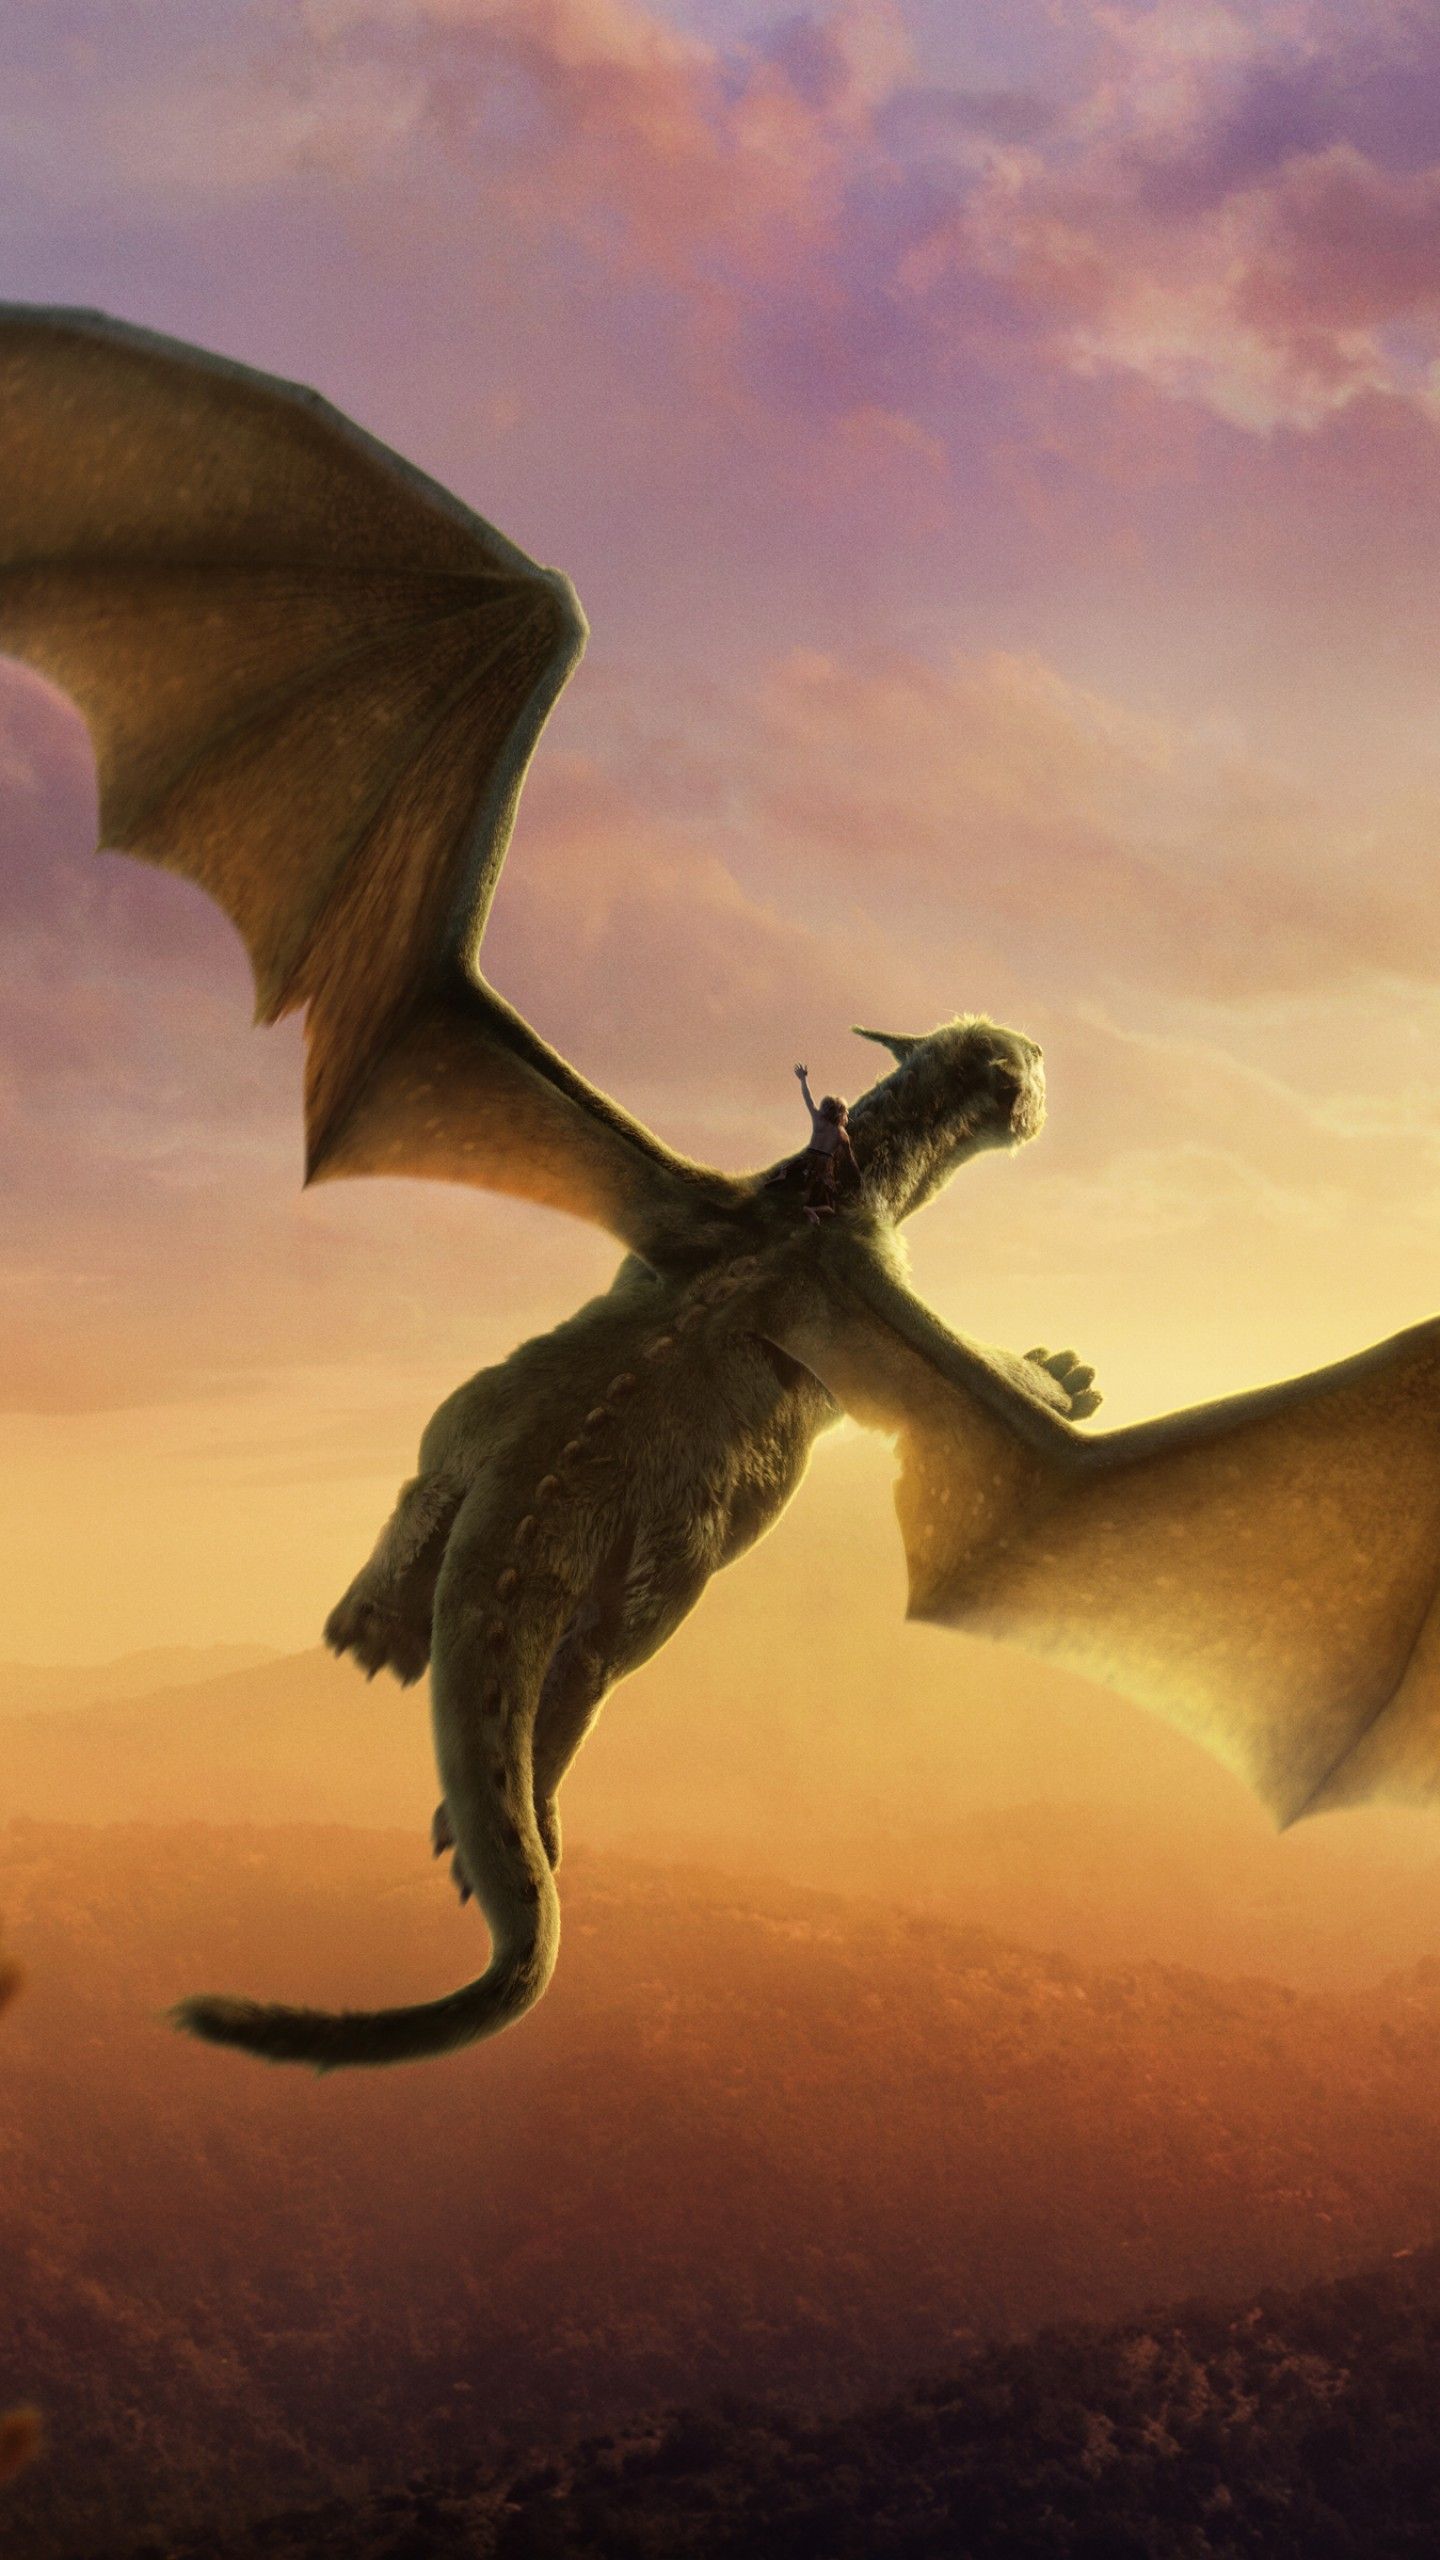 Wallpaper Pete's Dragon, Dragon, clouds, Best Movies of 2016